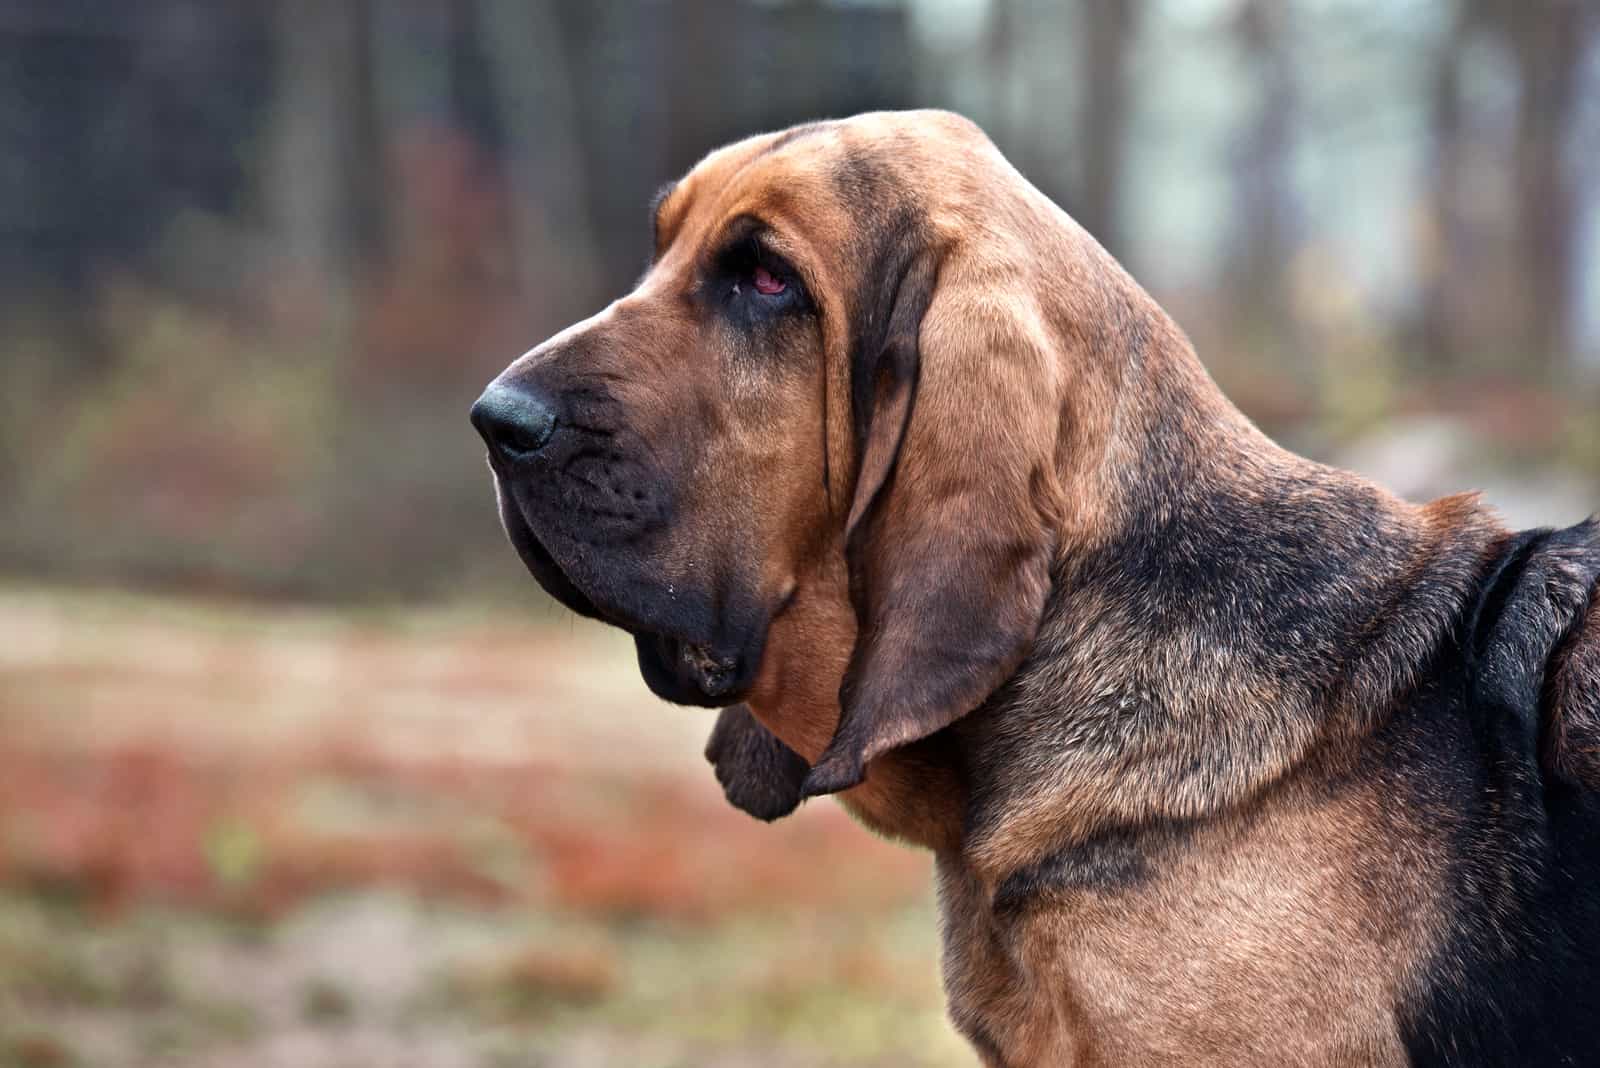 bloodhound is a mixed breed